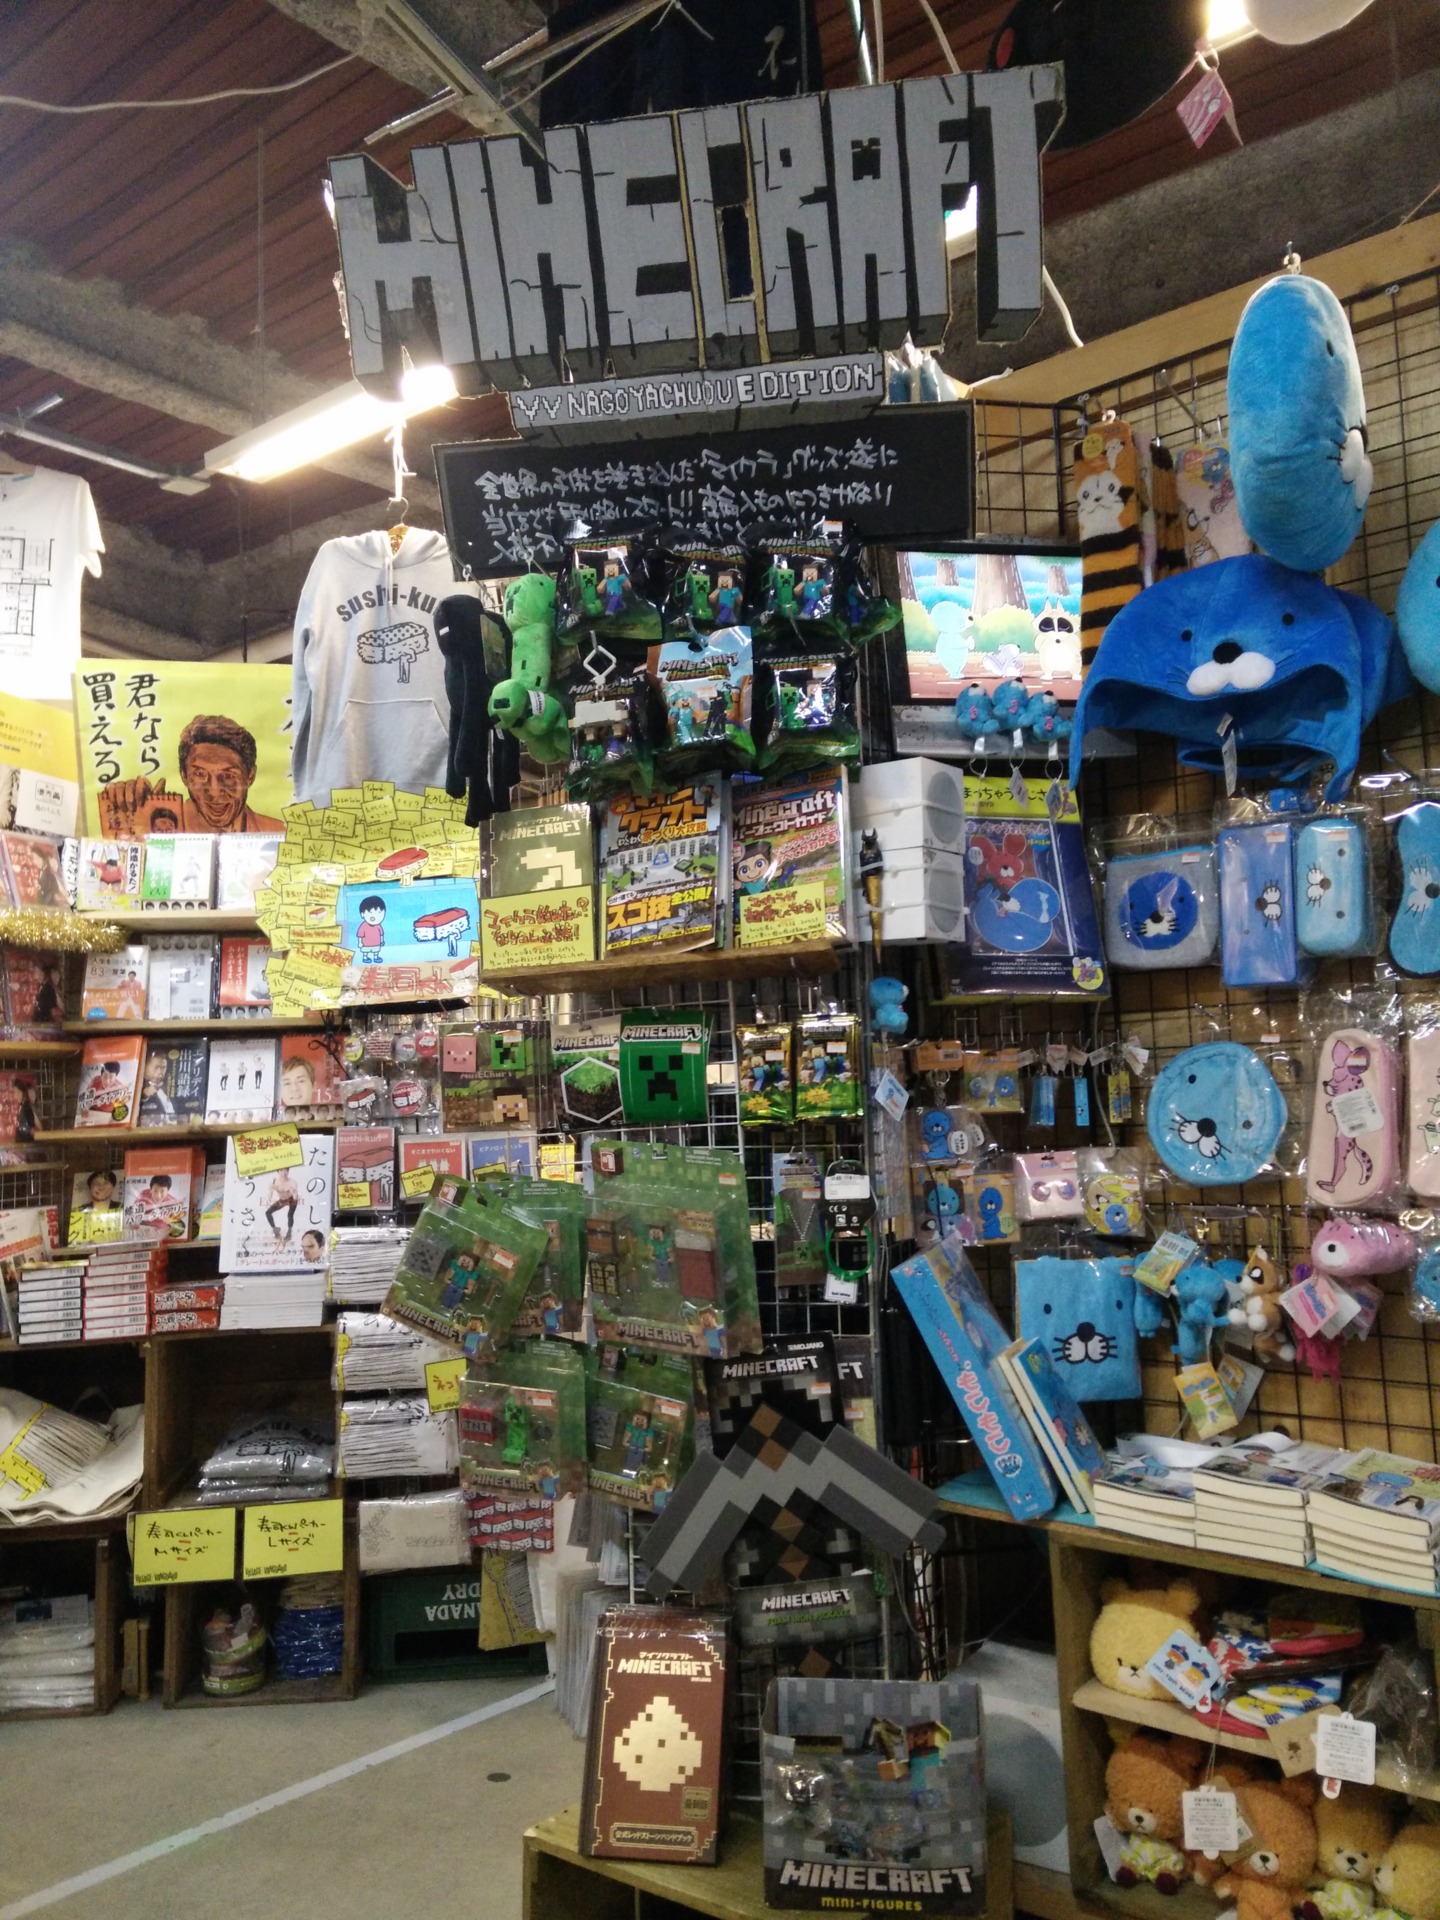 Not food, but here is a shelf of Minecraft merch I found in Nagoya!